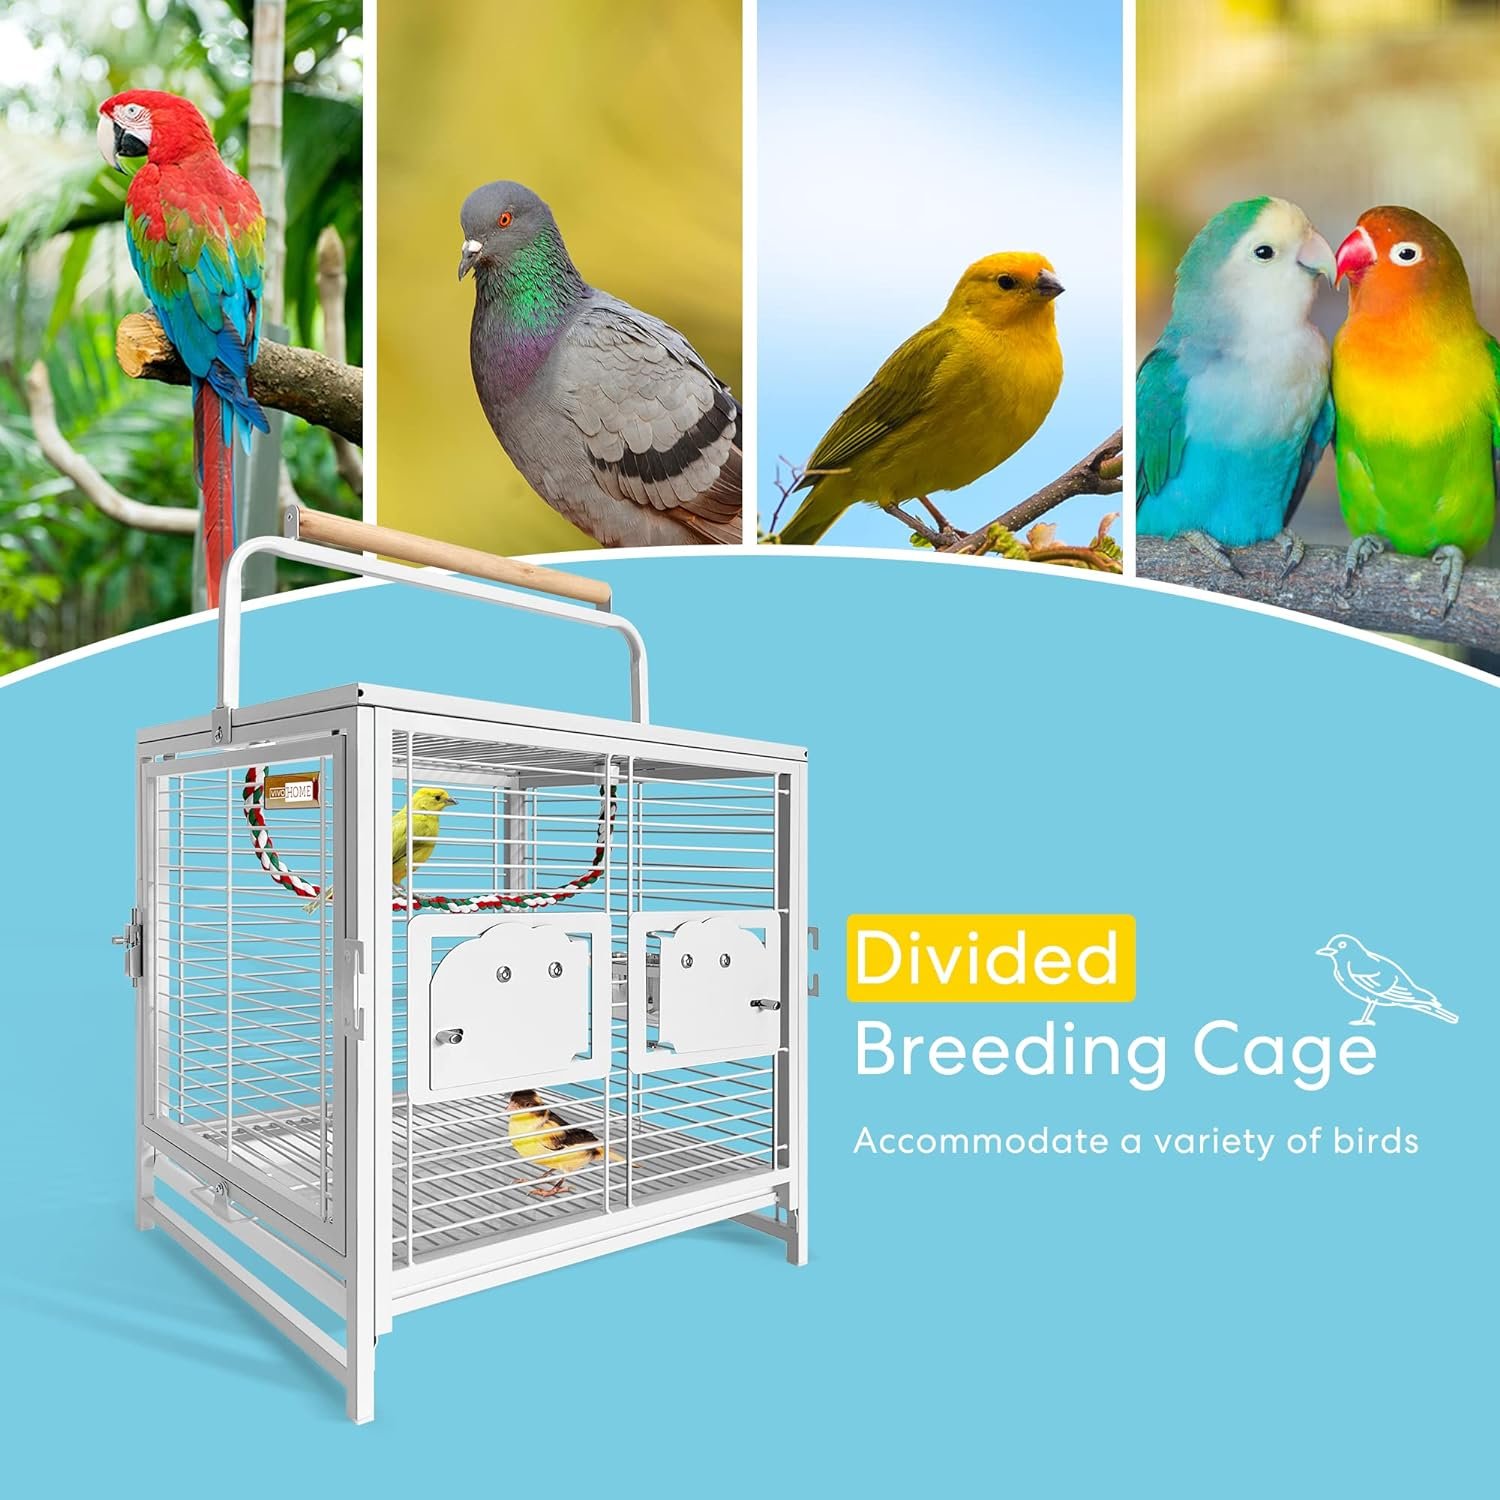 VIVOHOME 19 Inch Wrought Iron Bird Travel Carrier Cage for Parrots Conures Lovebird Cockatiel Parakeets White